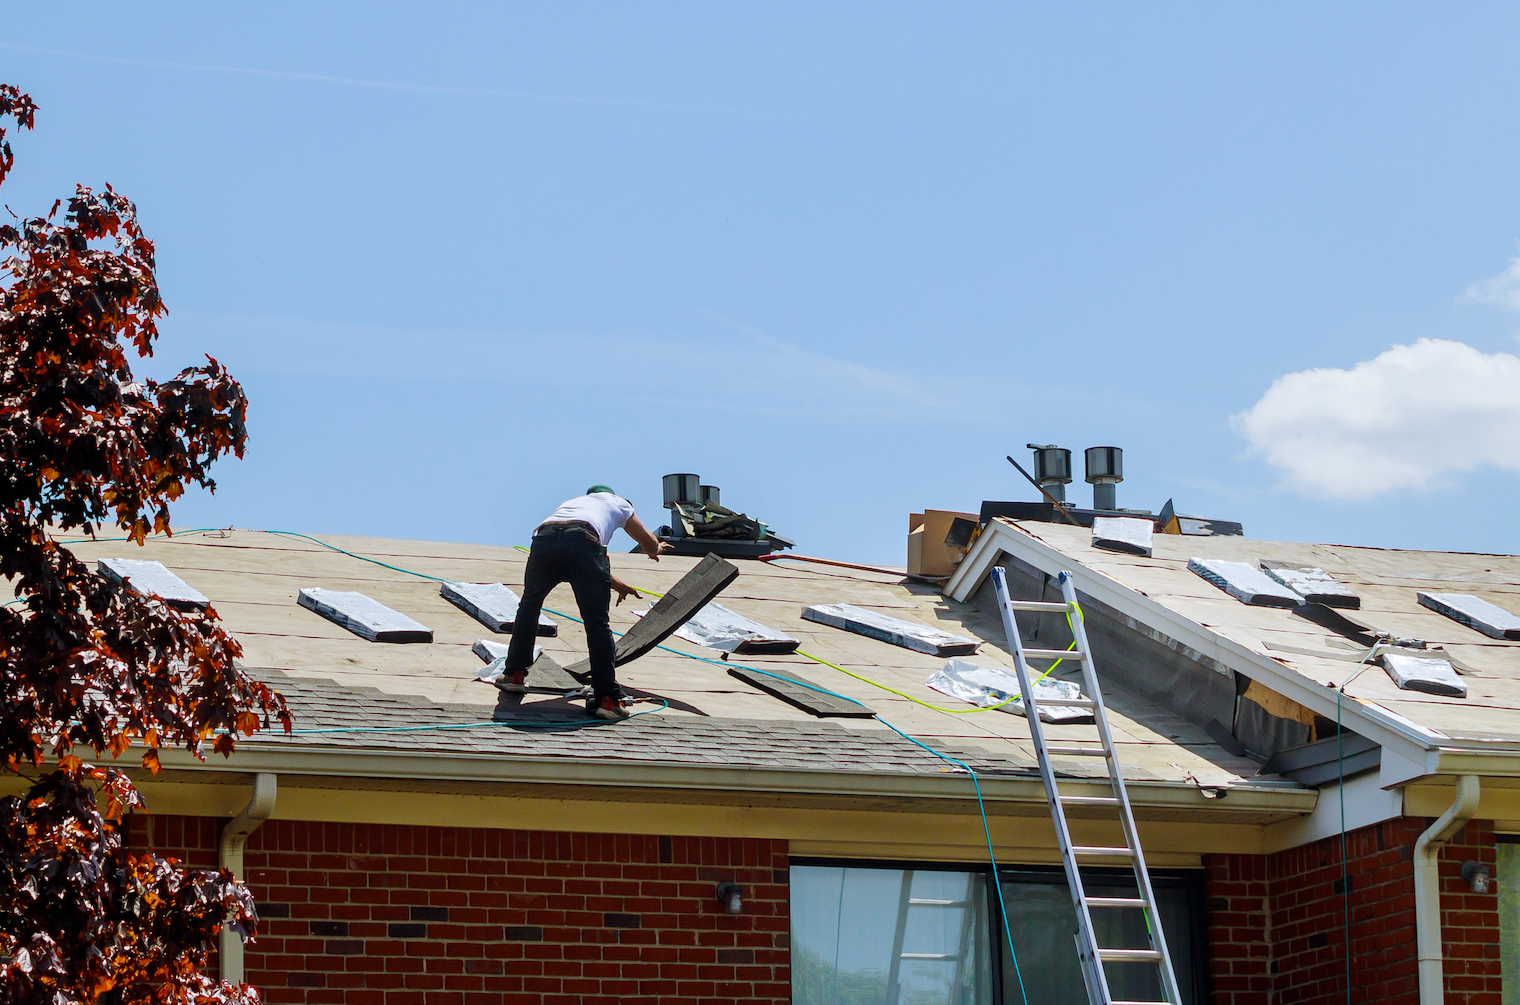 Workers replacing an existing roof with new shingles